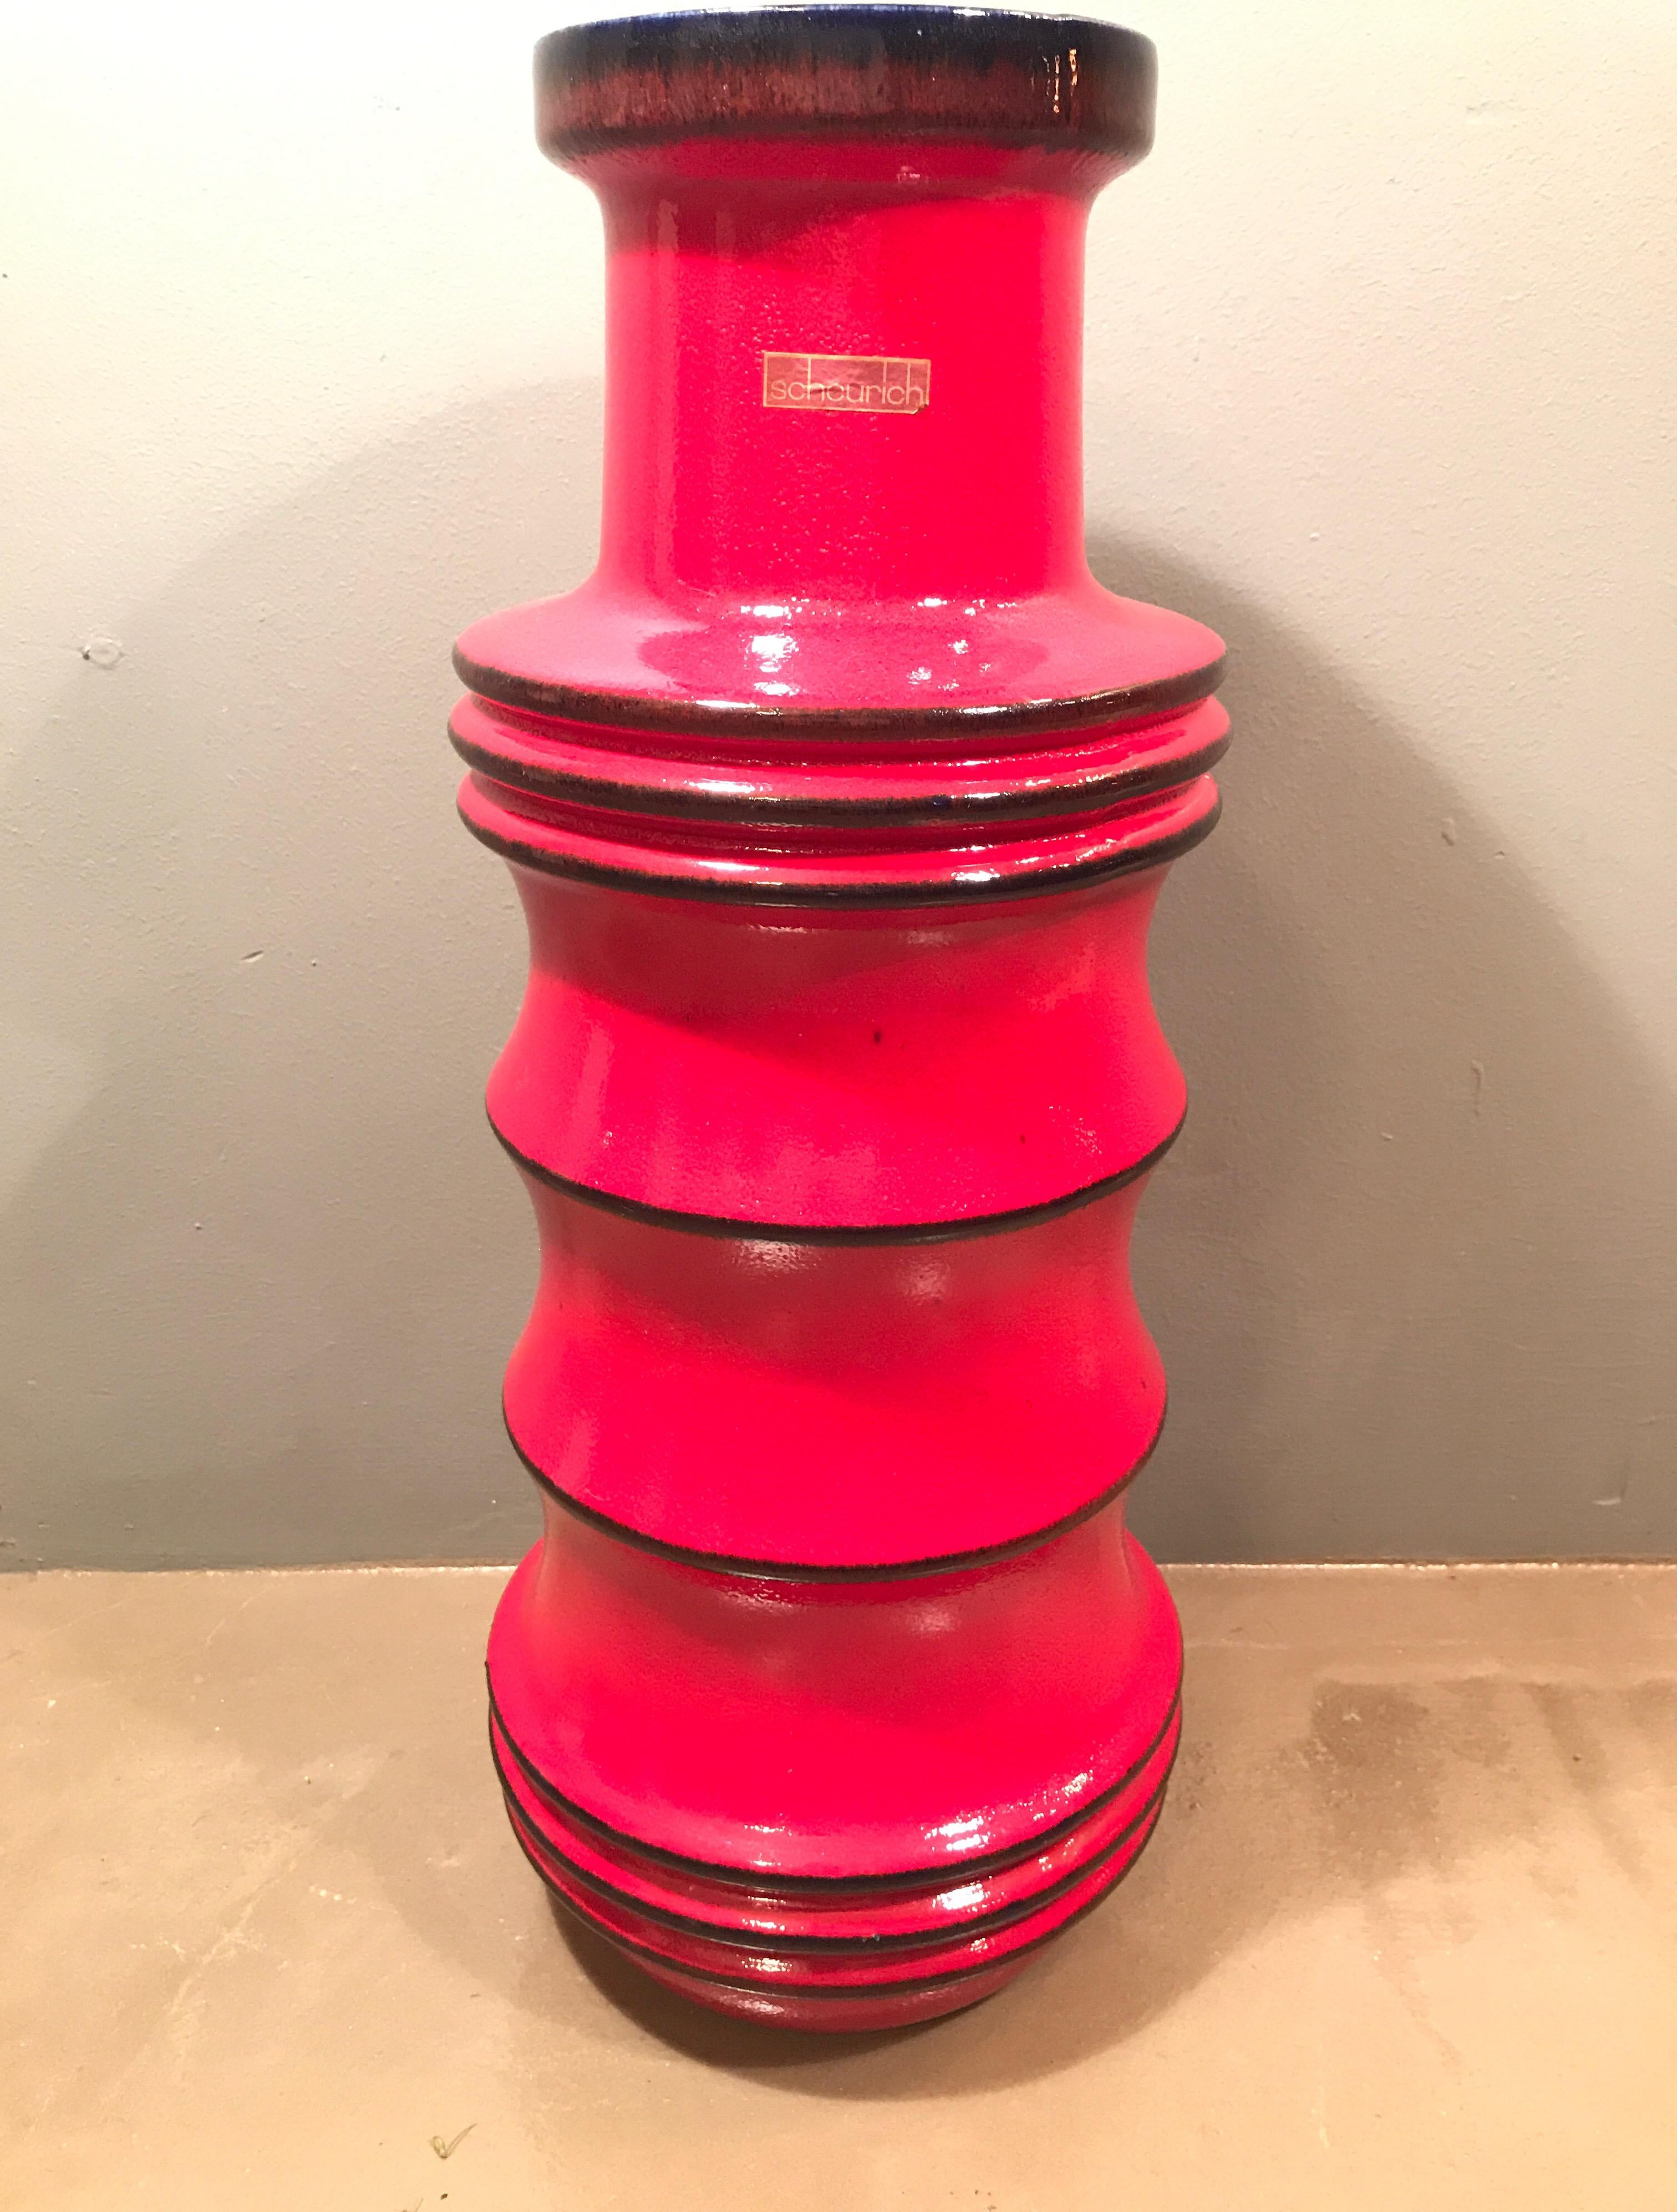 Vintage West German art vase from the 1970s
Great color and an item that can change a room.